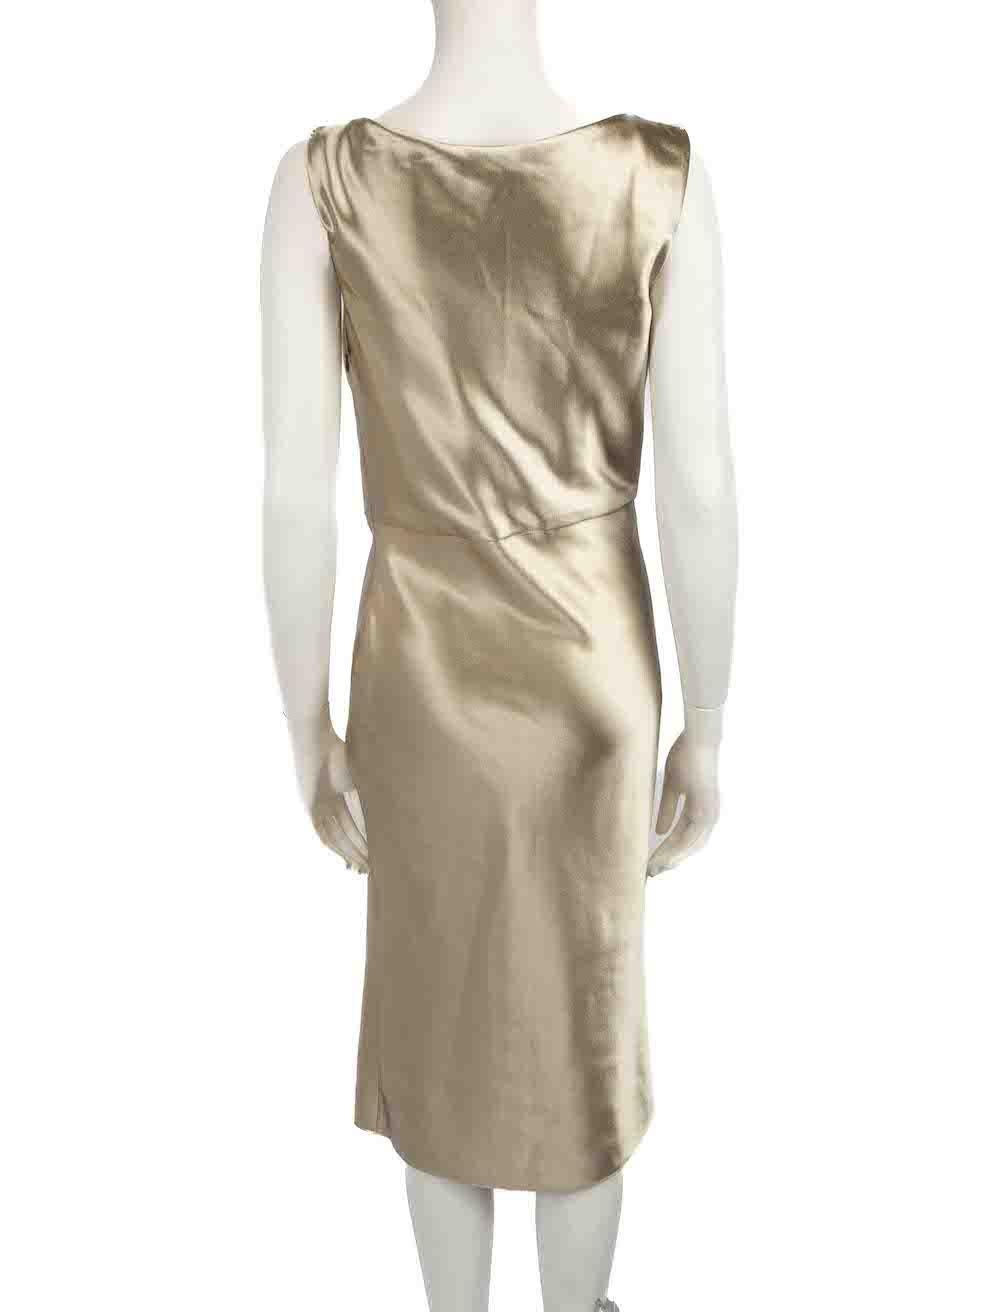 Nili Lotan Gold Wide Neck Midi Length Dress Size S In New Condition For Sale In London, GB